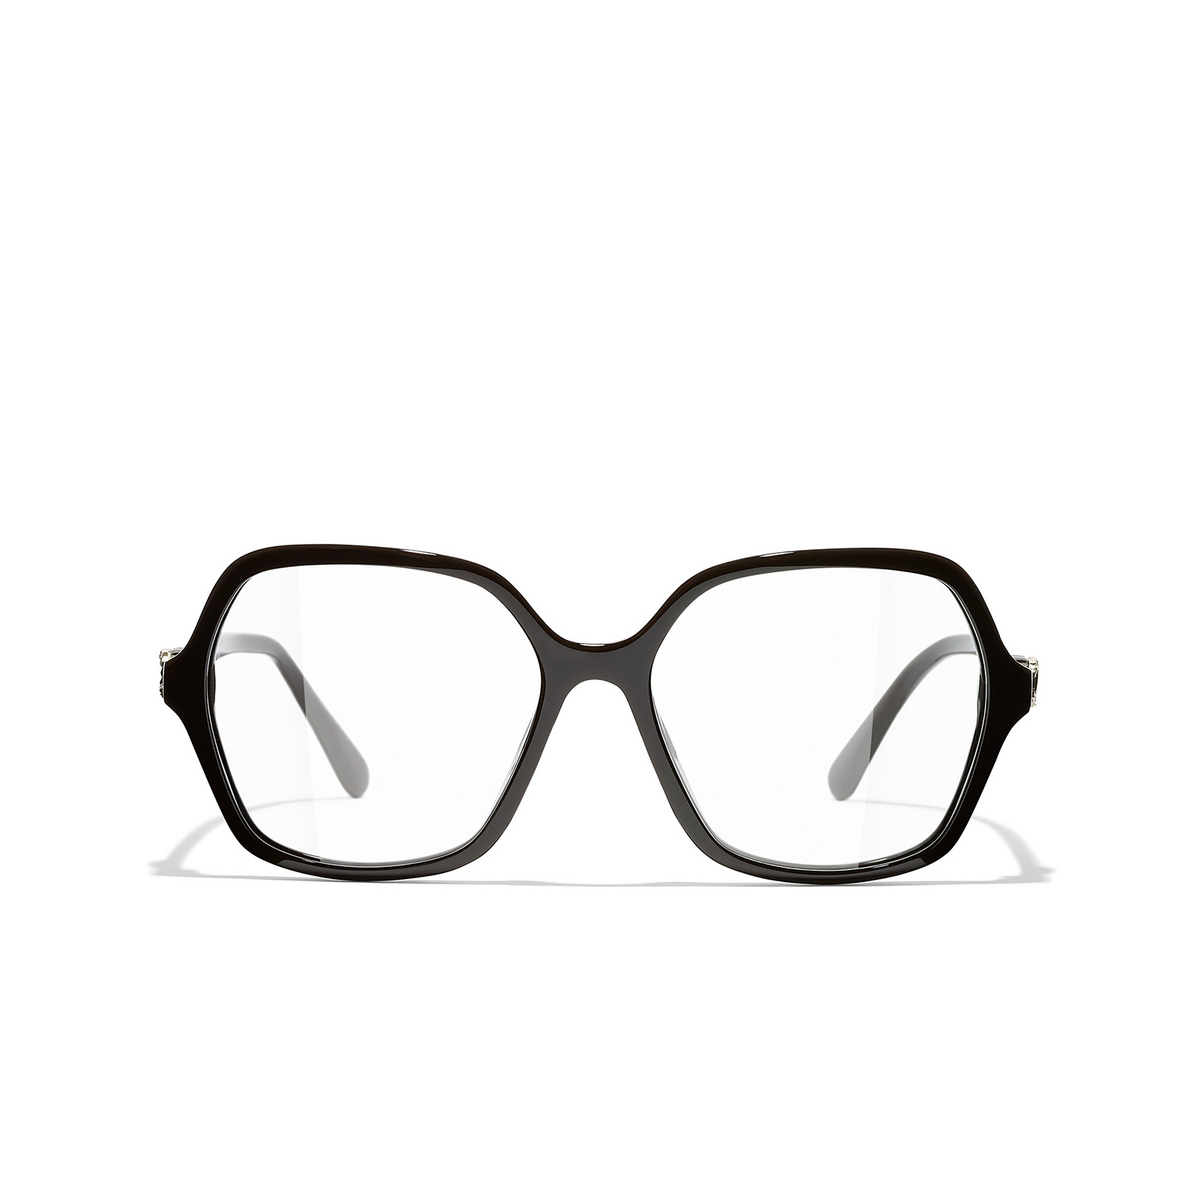 CHANEL square Eyeglasses 1460 Brown - front view